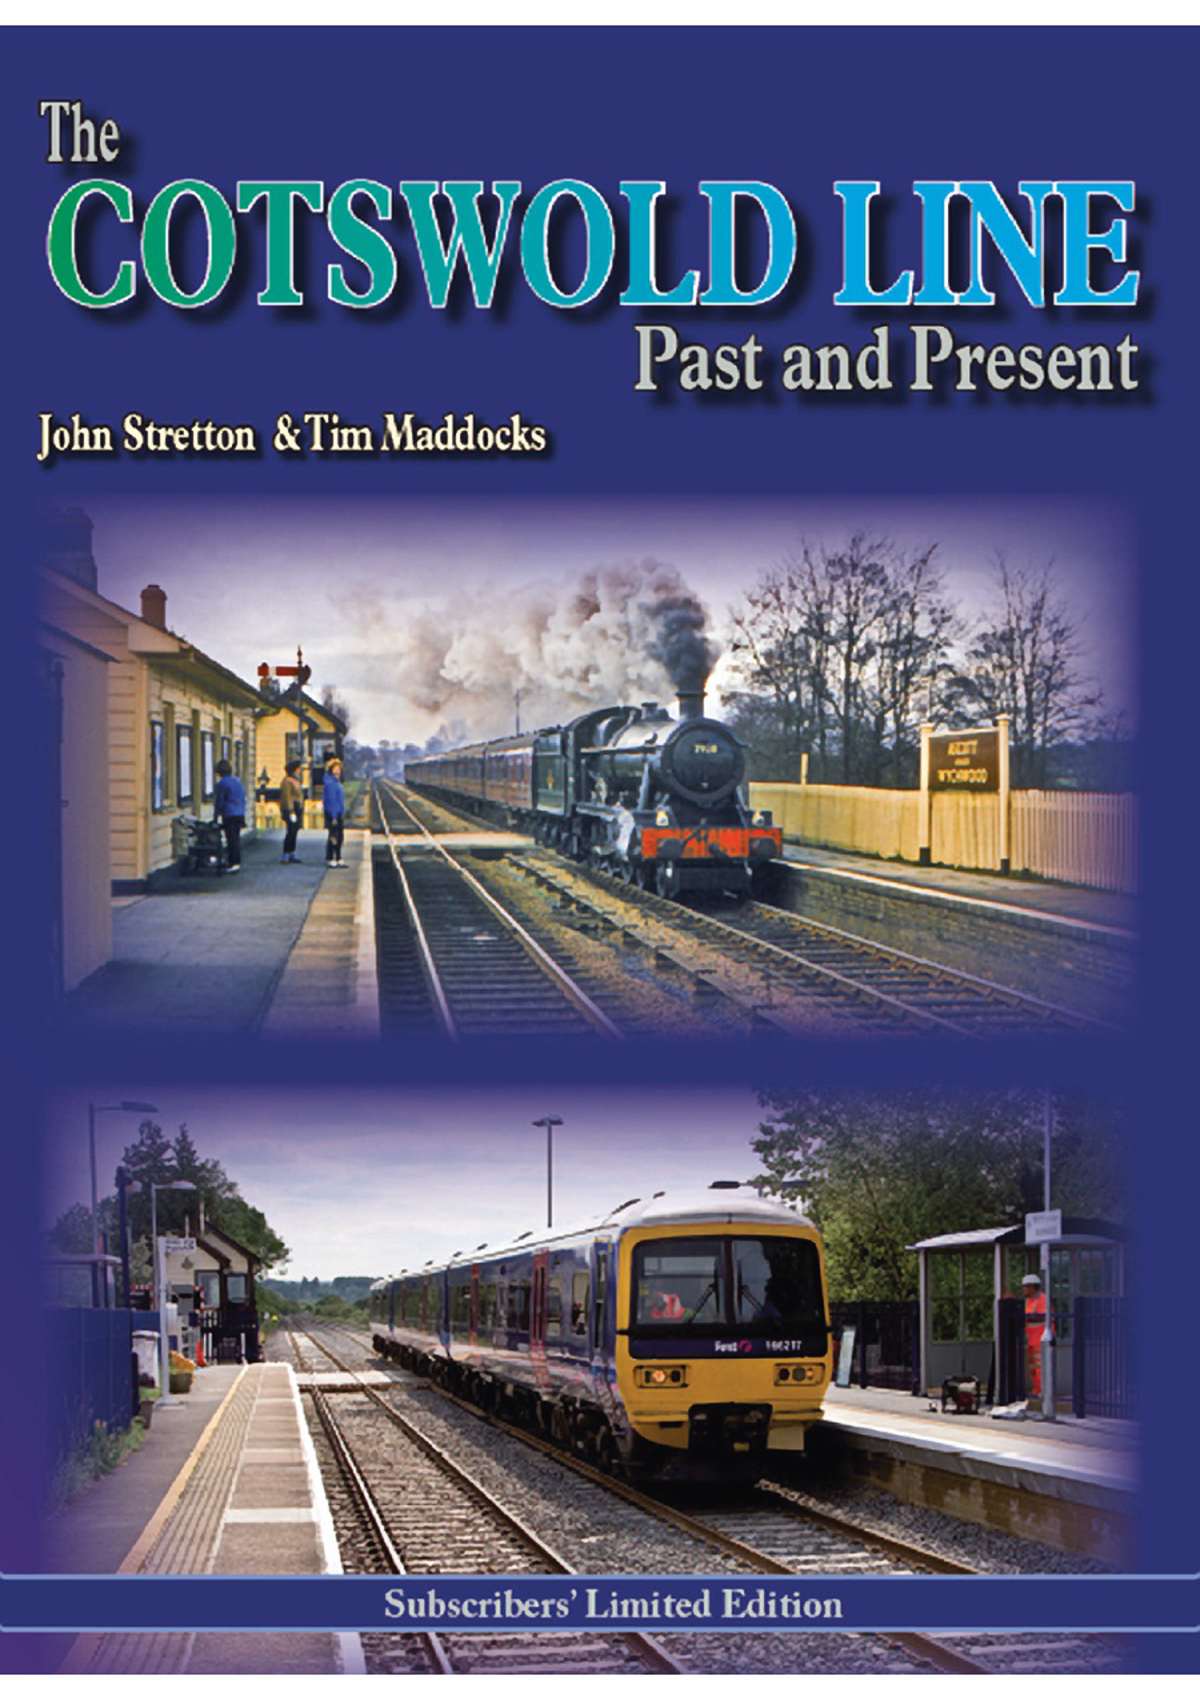 2789 The Cotswold Line Past and Present Subscriber